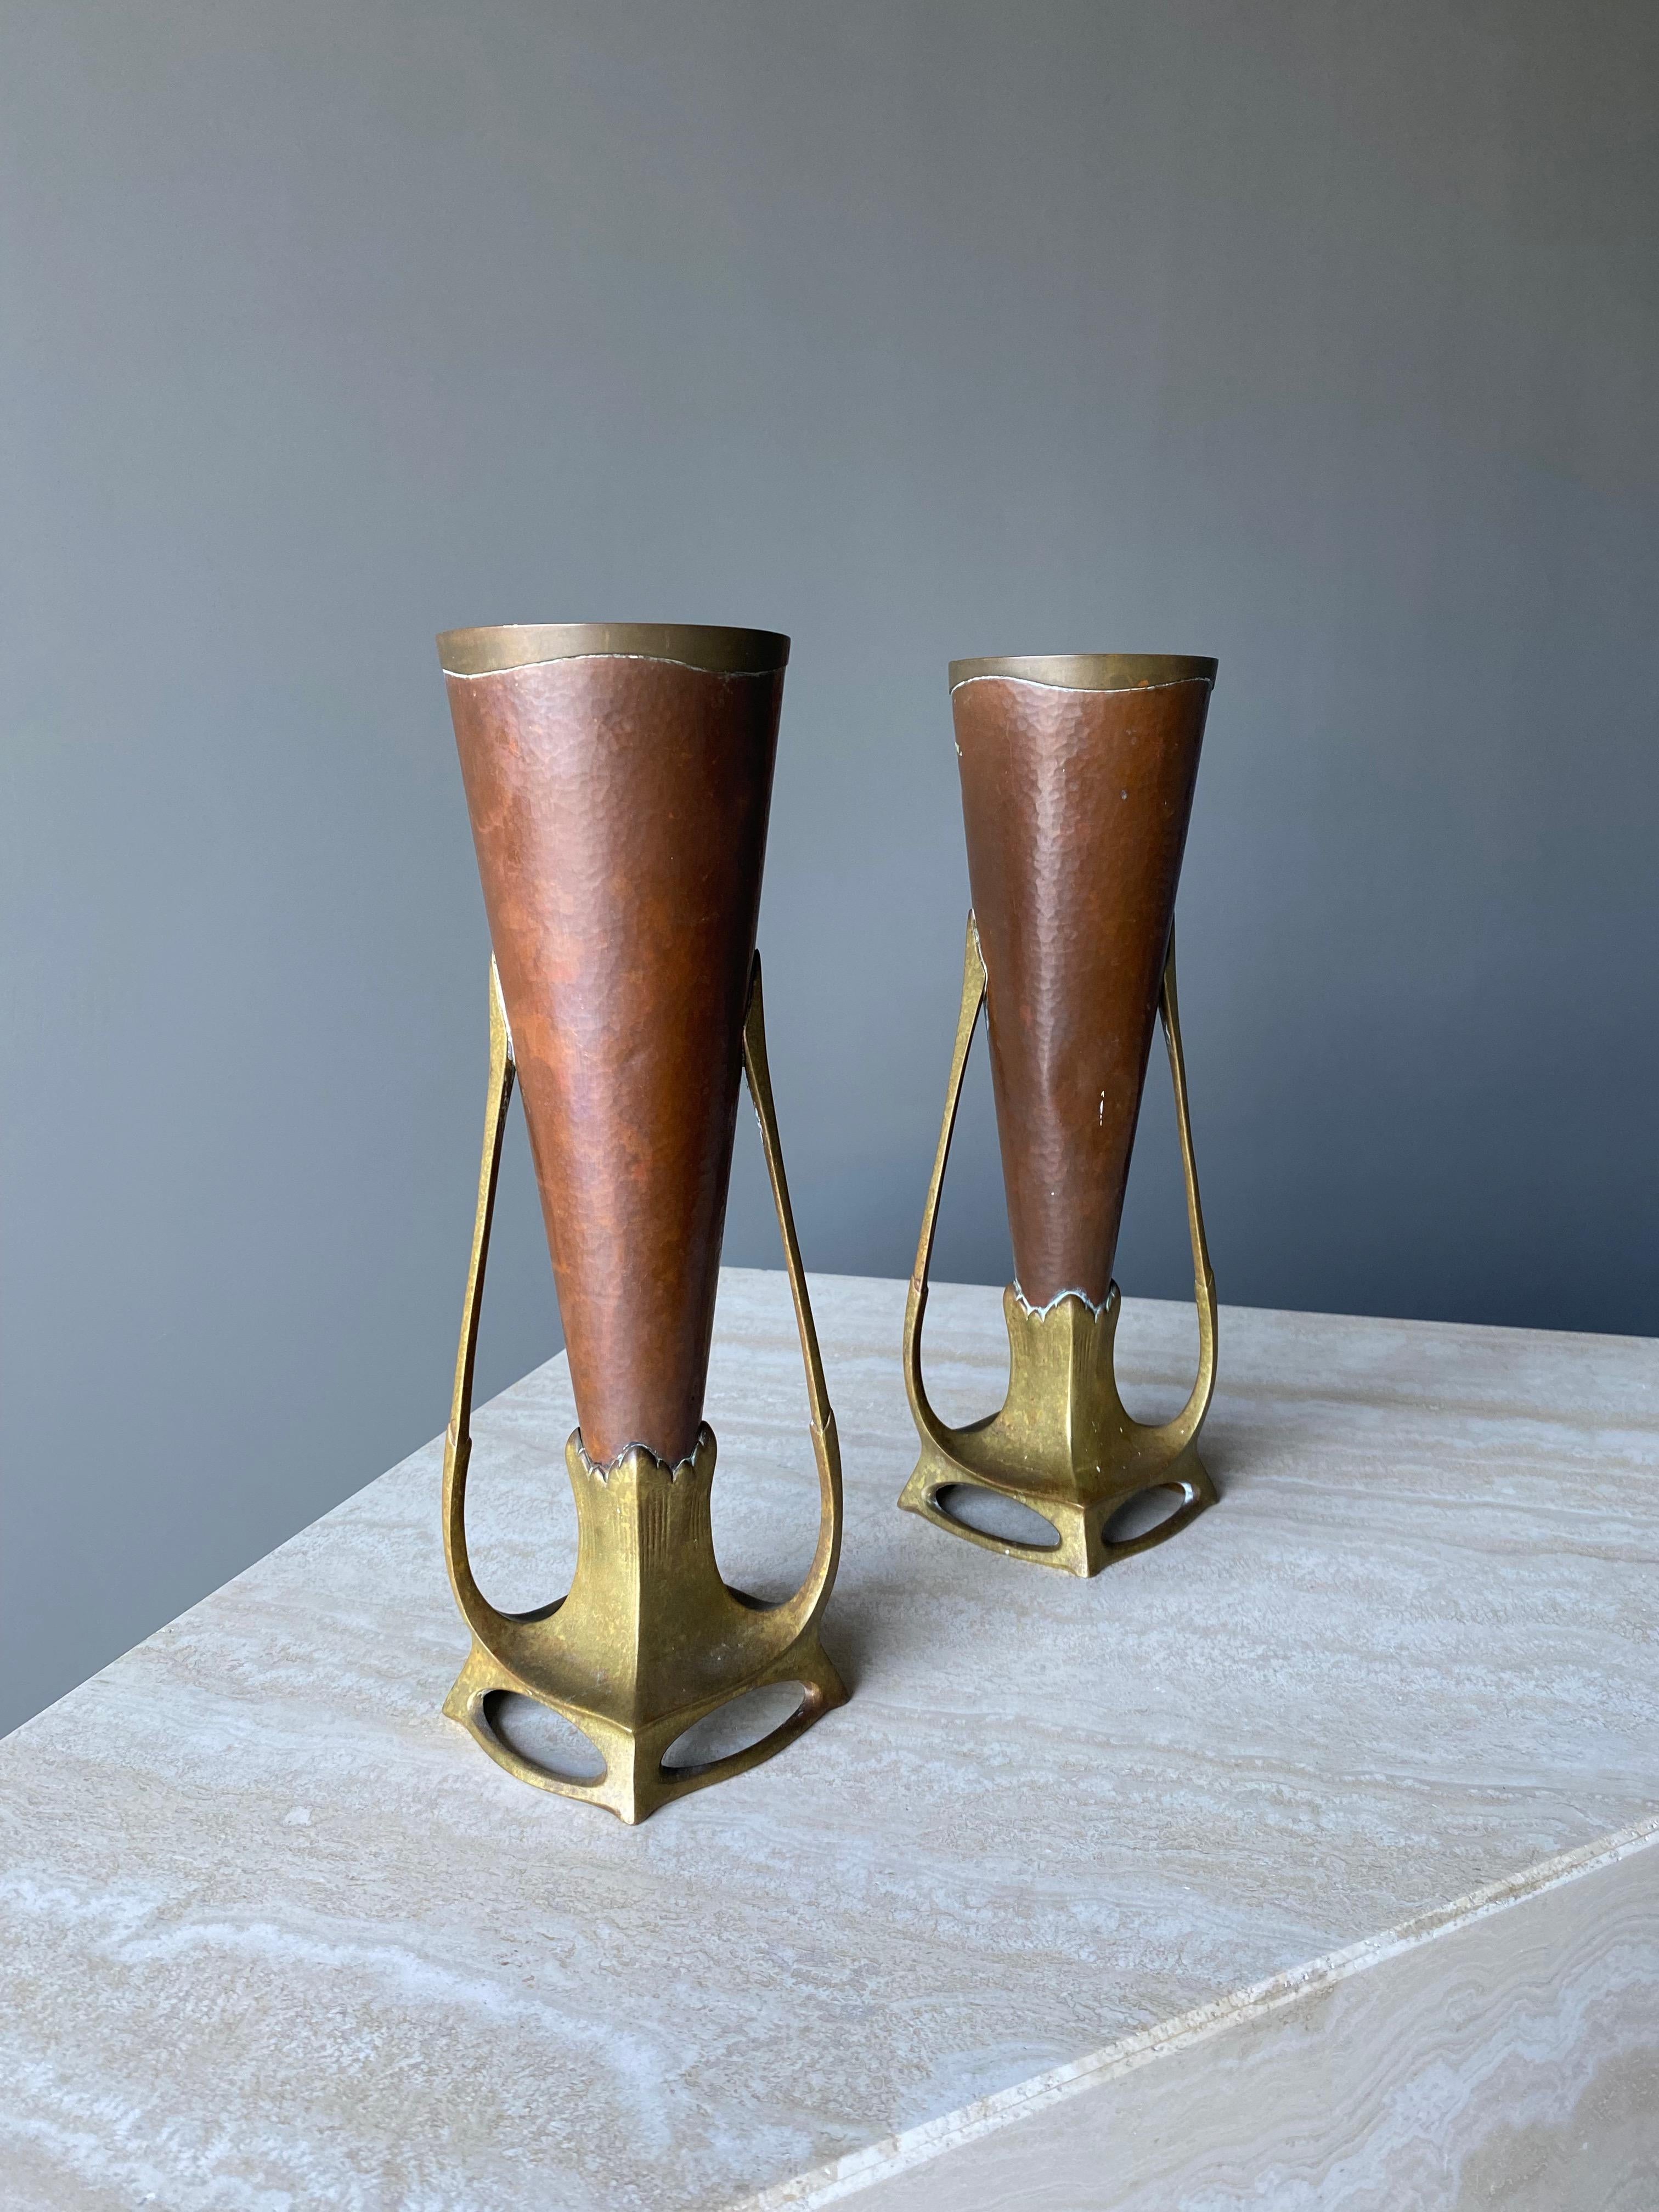 Carl Deffner Pair of Hammered Copper & Cast Bronze Vases, Germany, circa 1900 For Sale 8